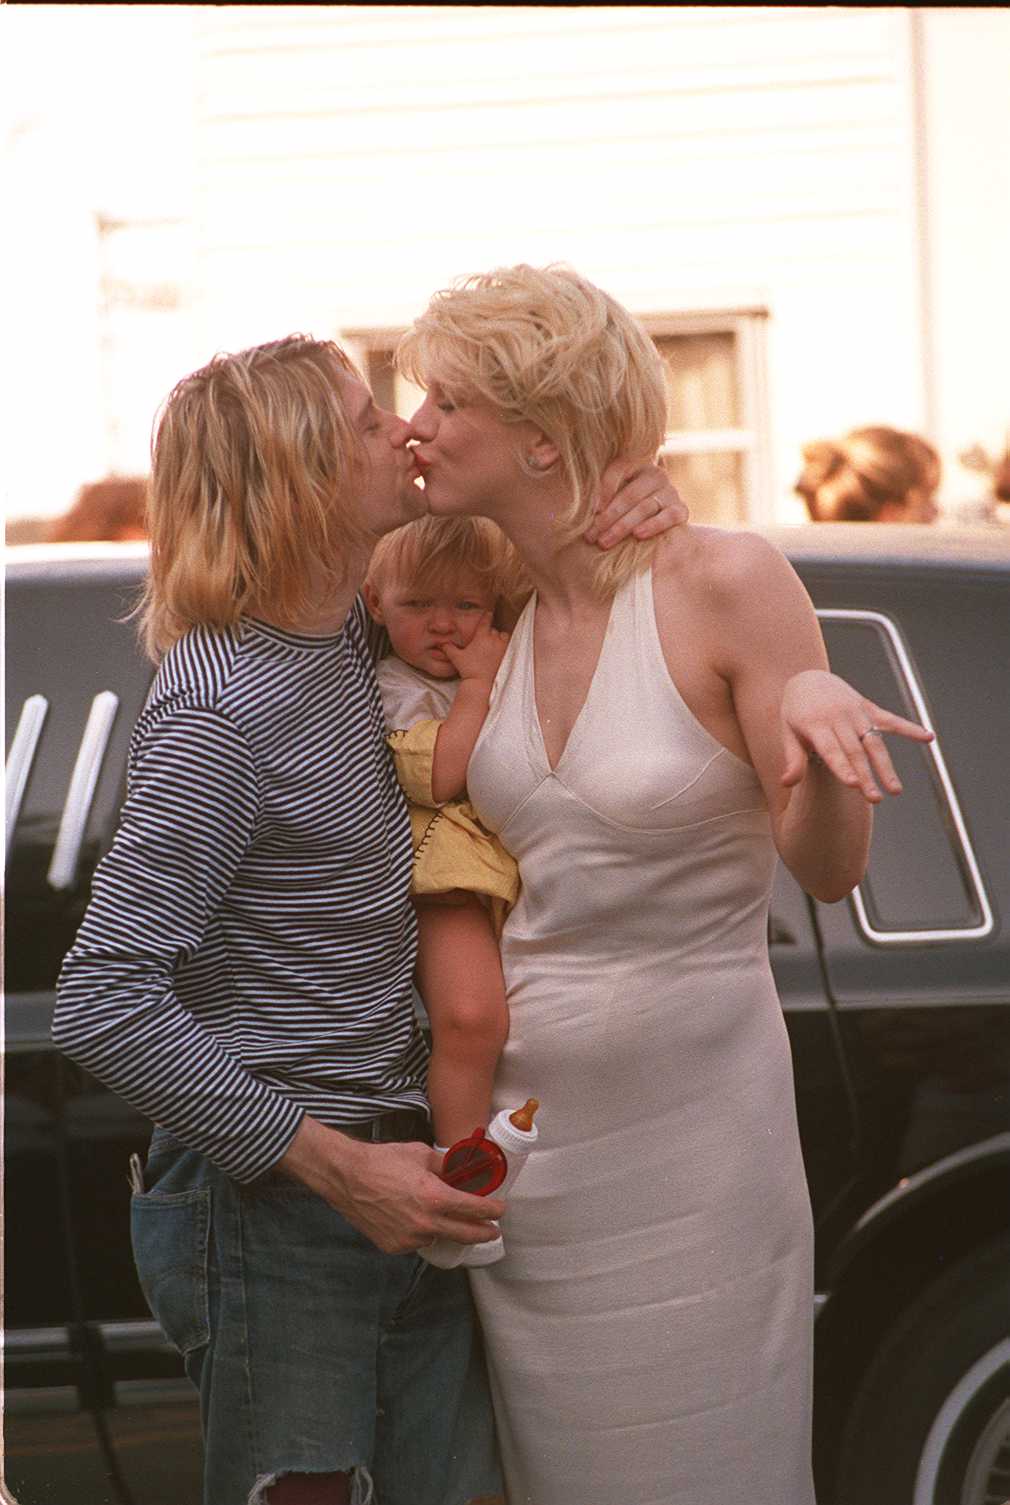 The iconic rocker, his wife, and their baby at the 10th Annual MTV Music Video Awards in Los Angeles, California on September 2, 1993 | Source: Getty Images